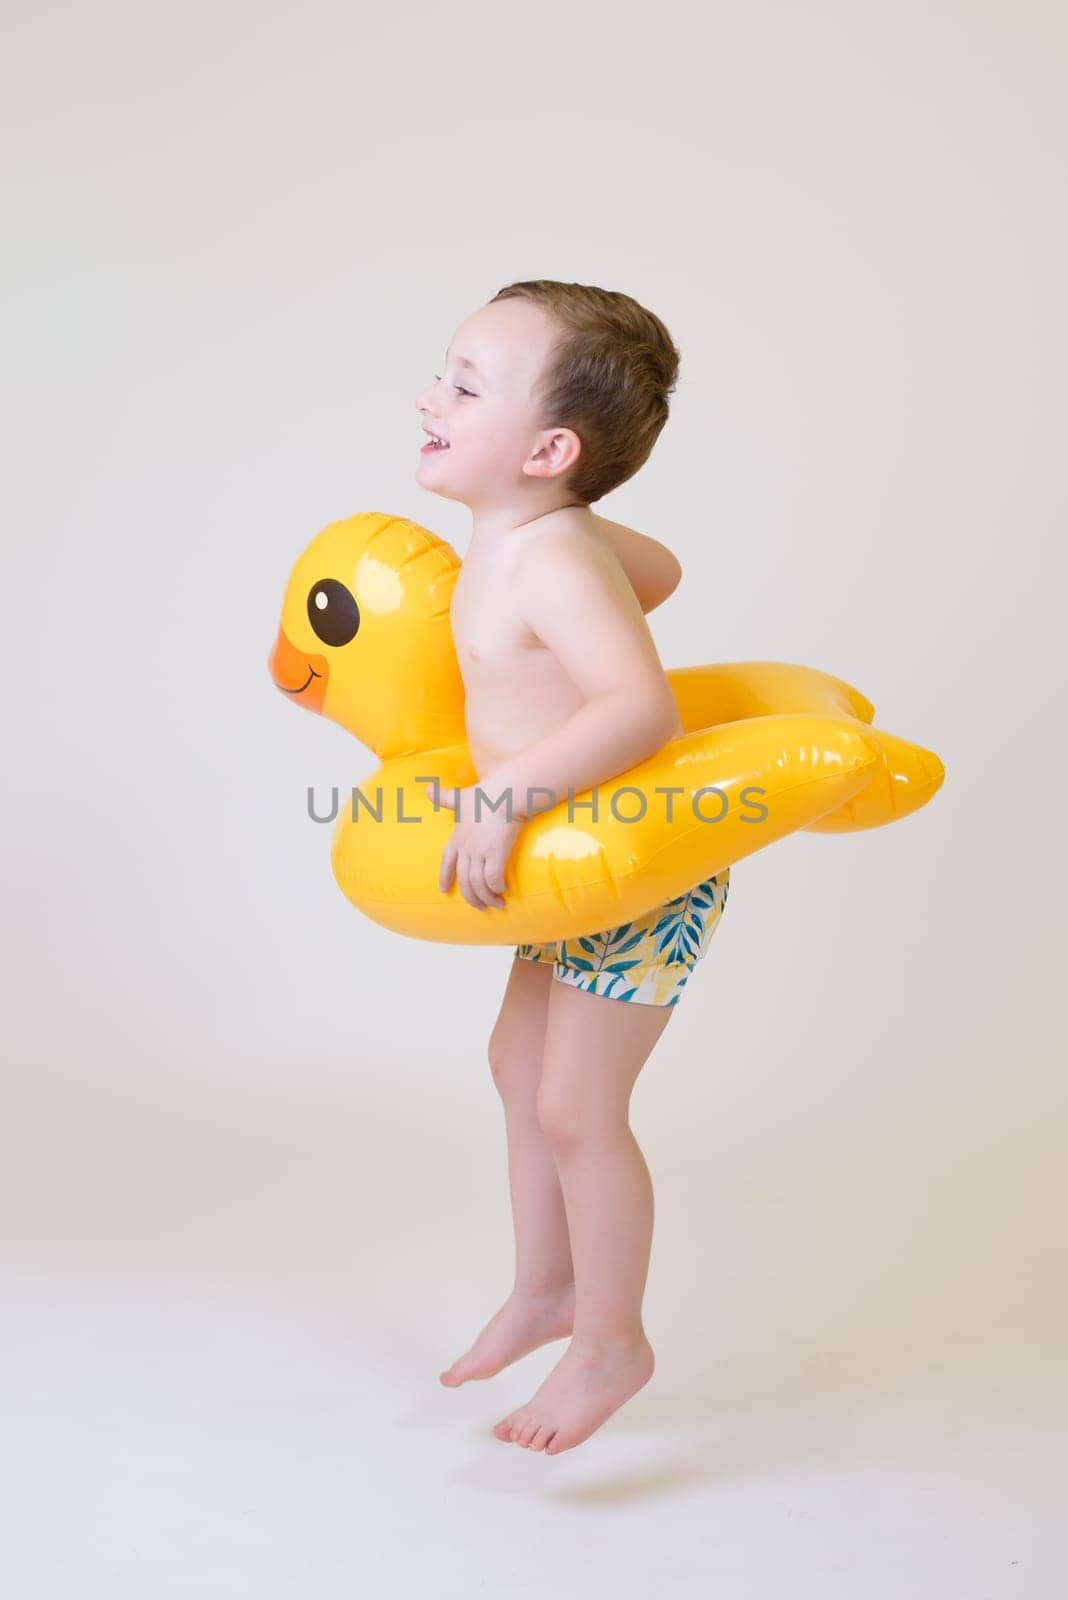 adorable boy with a float on a white background. Summer Vacation..